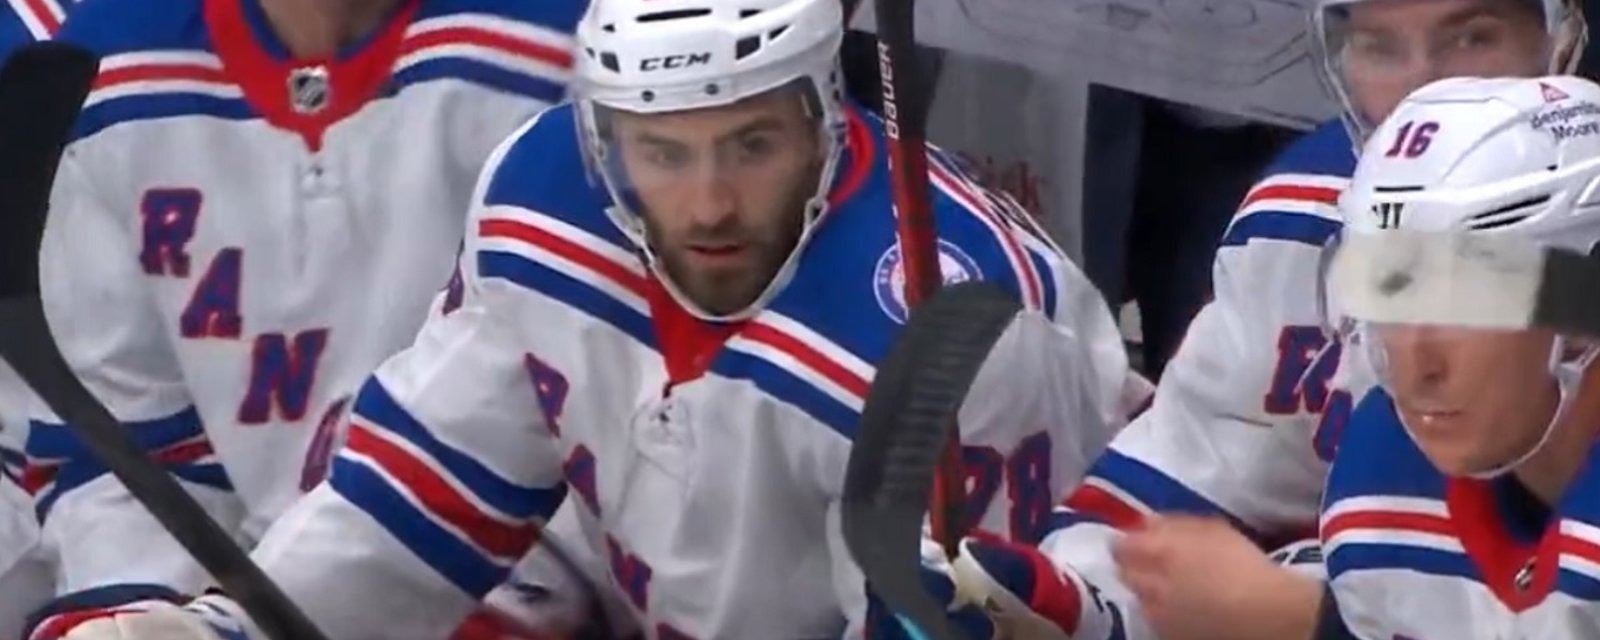 Son of 9/11 first responder plays his first NHL game for the New York Rangers.